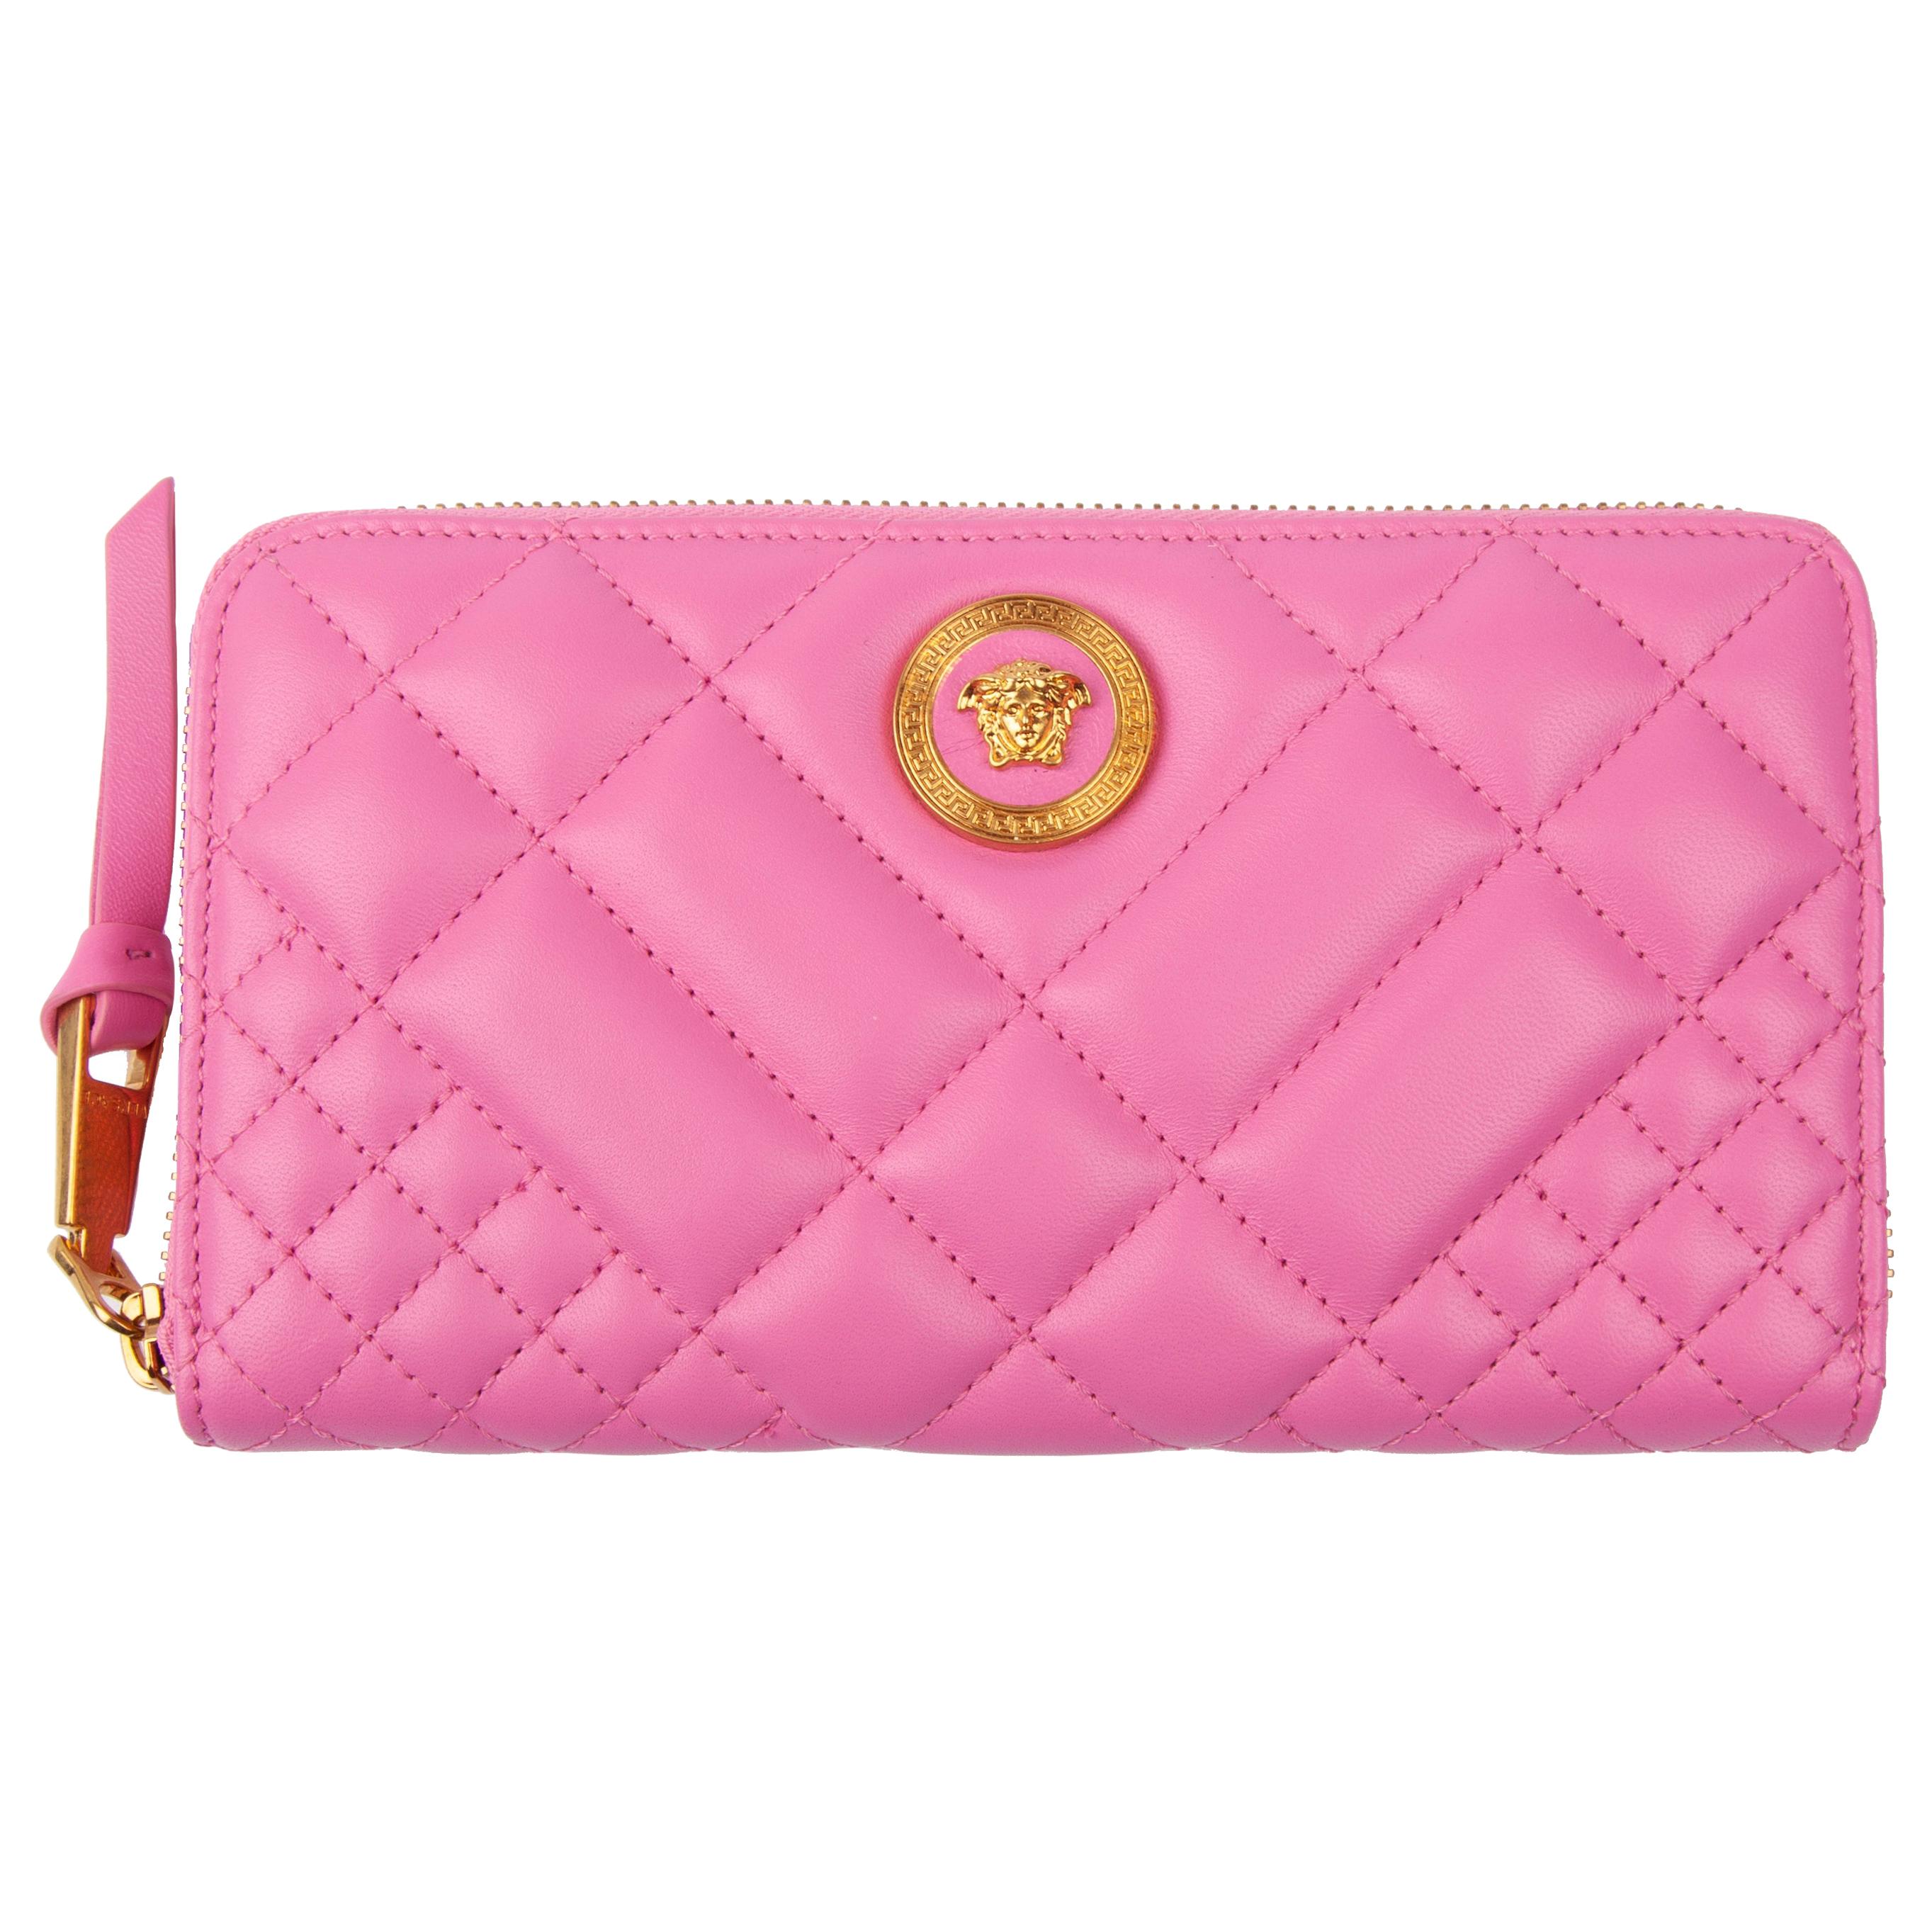 Versace Pink Quilted Icon Zip Around Leather Wallet w/ Gold Tone Medusa Hardware